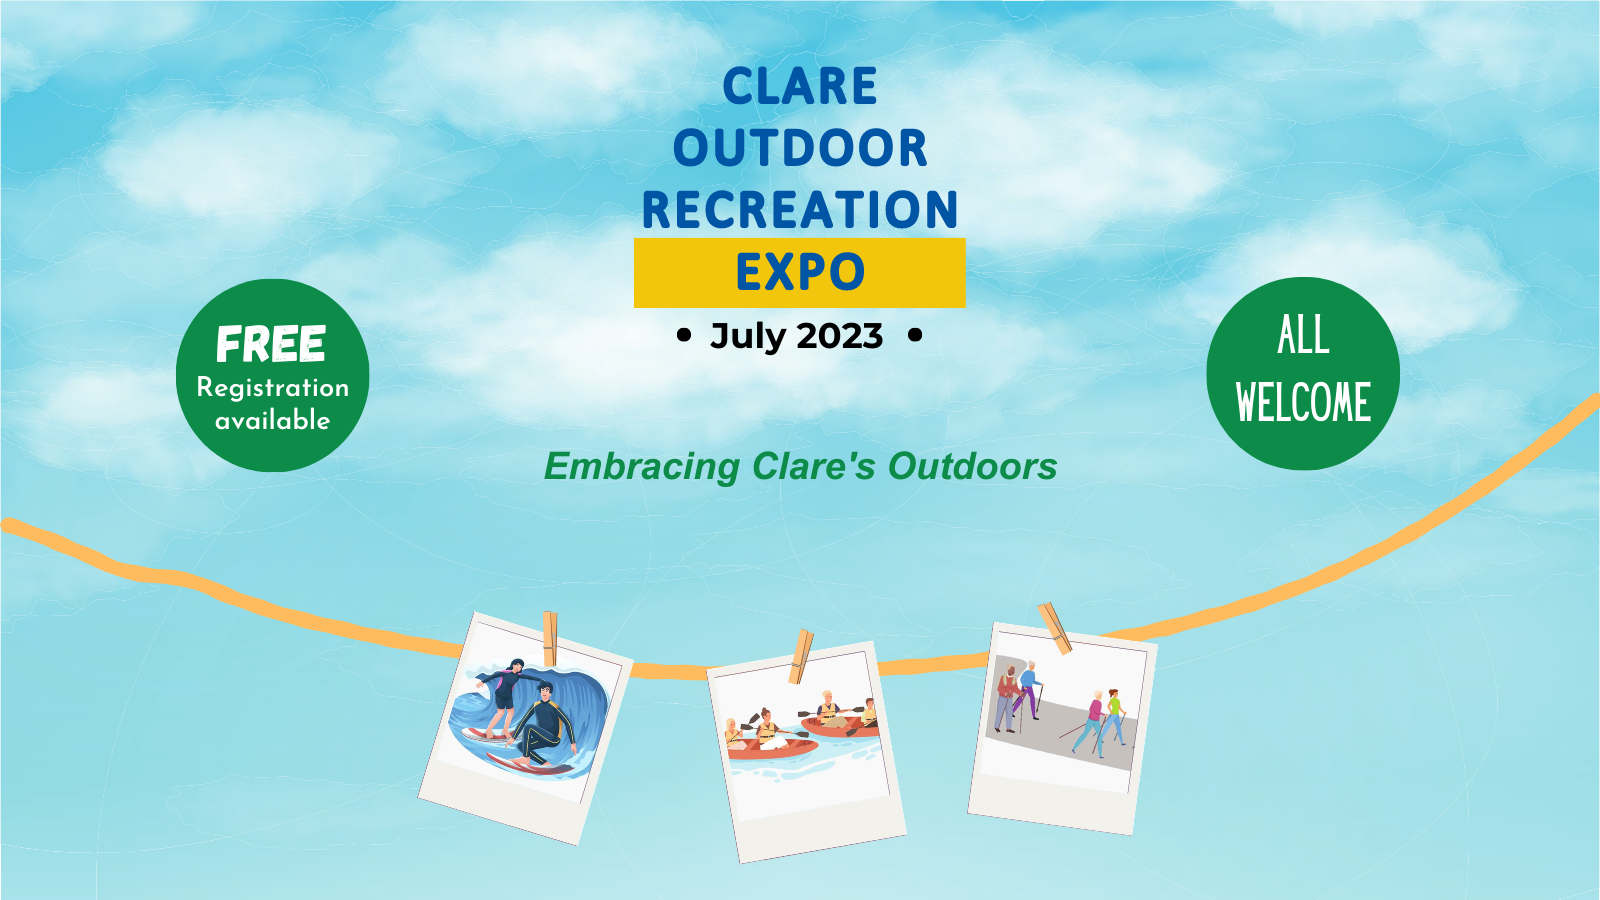 Clare Outdoor Recreation EXPO Partners